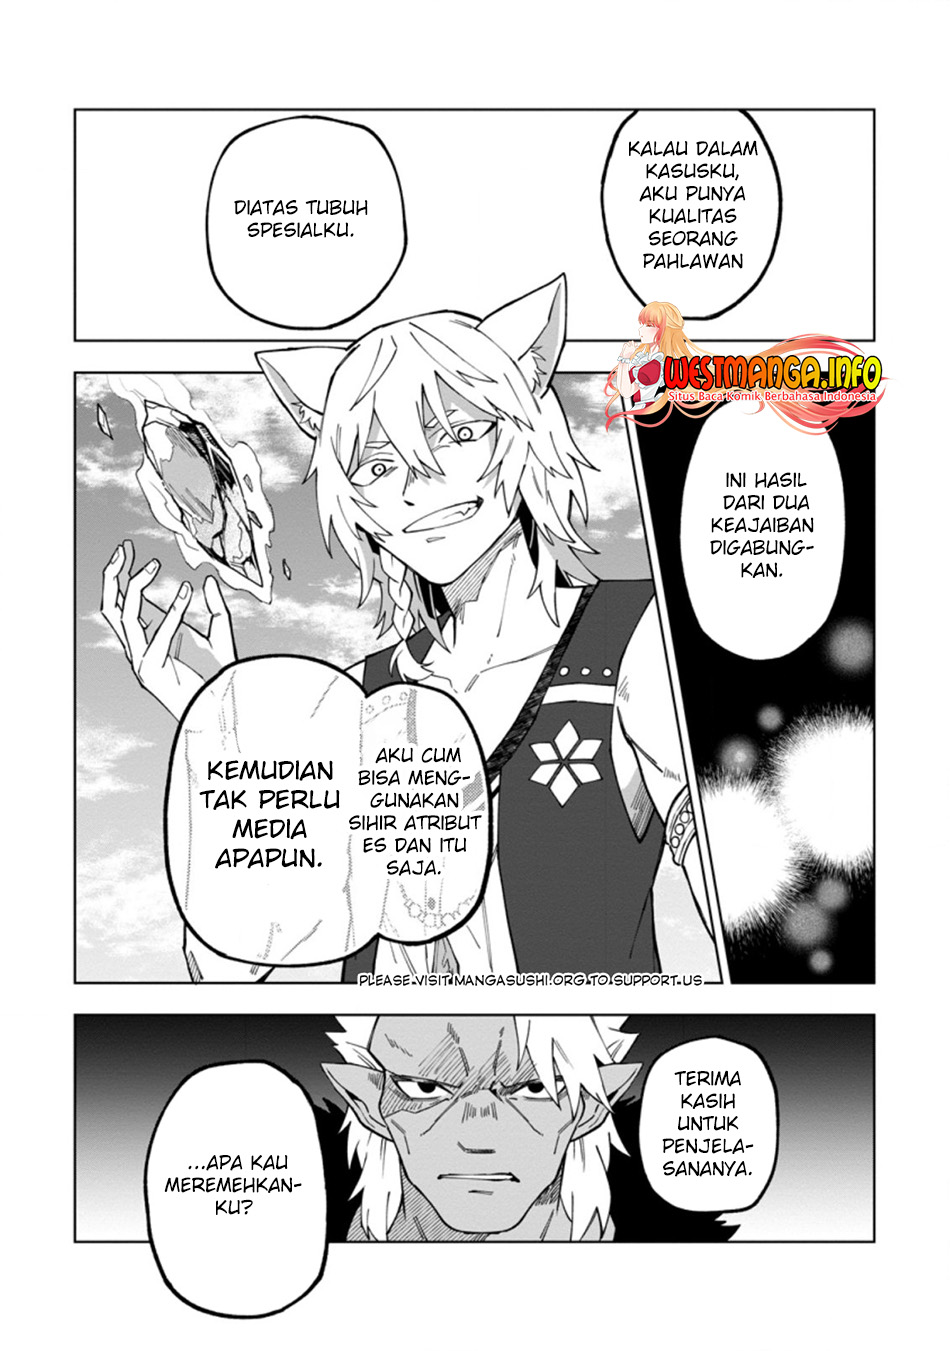 KomiknThe White Mage Who Was Banished From the Hero’s Party Is Picked up by an S Rank Adventurer ~ This White Mage Is Too Out of the Ordinary! Chapter 17.2